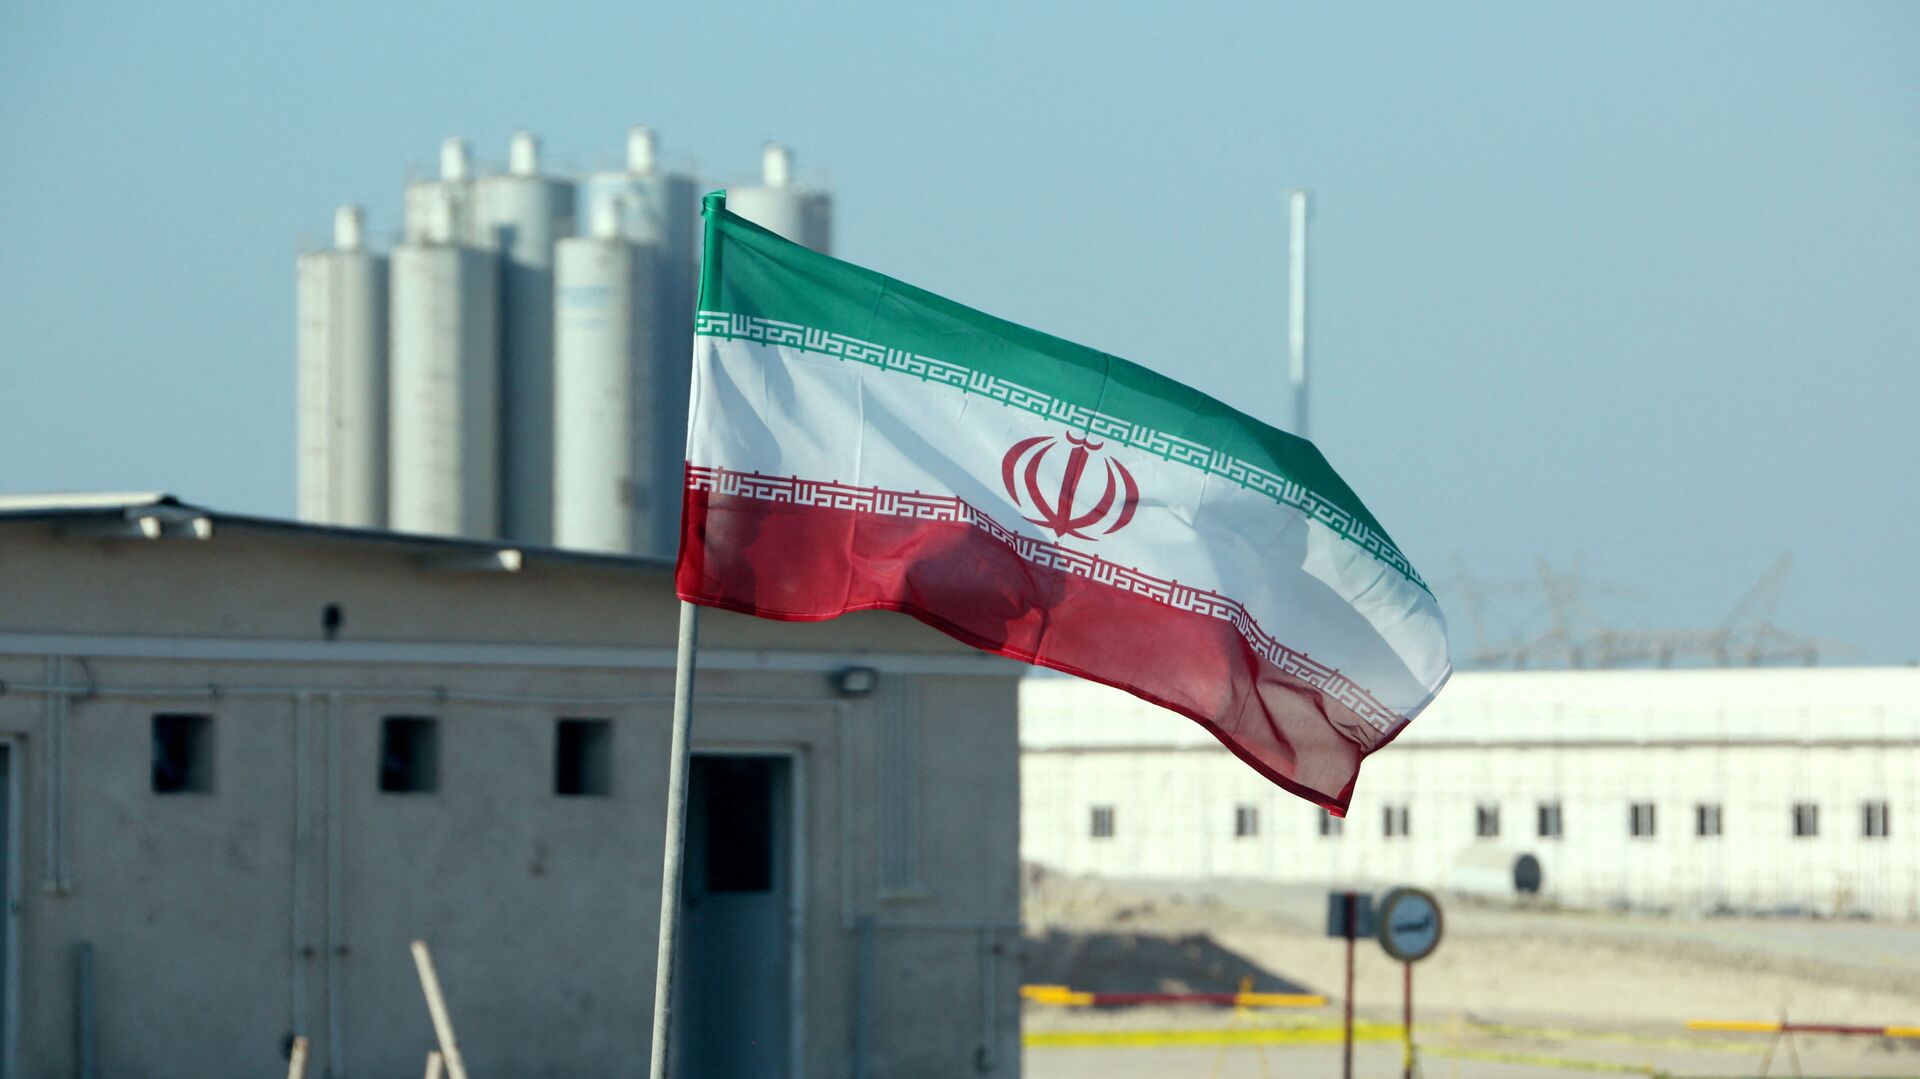 A picture taken on November 10, 2019, shows an Iranian flag in Iran's Bushehr nuclear power plant, during an official ceremony to kick-start works on a second reactor at the facility - Sputnik International, 1920, 16.02.2022